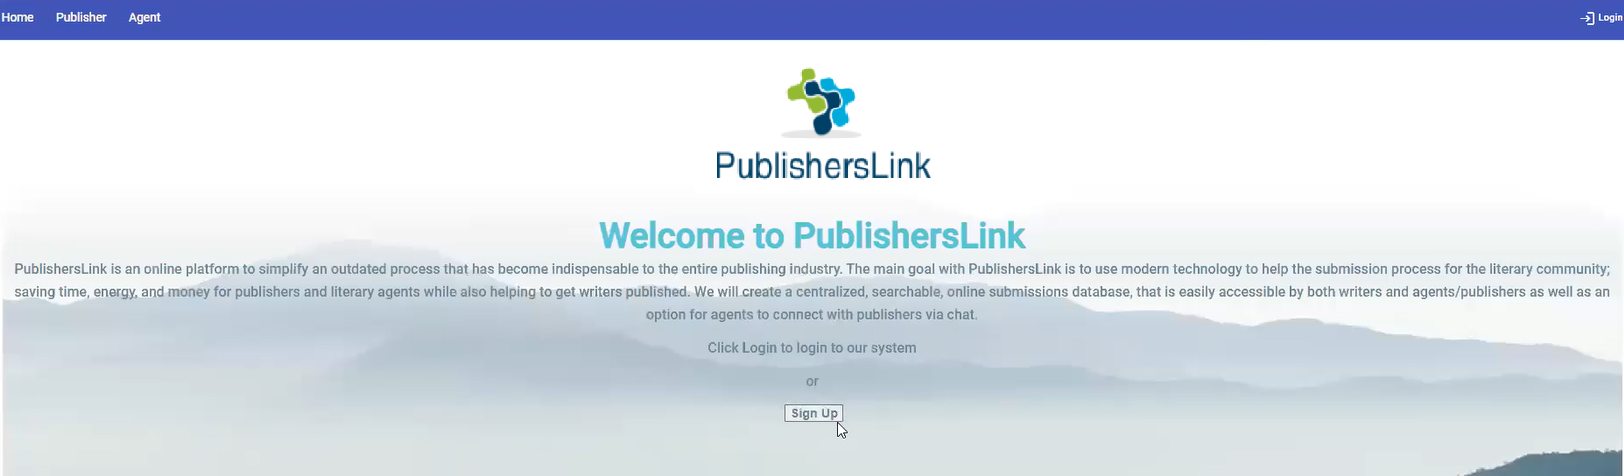 PublishersLink is an online platform that will help writers and publishers in the publishing industry with the submission process by providing a more efficient way to improve the chances of authors to sell their work and getting published.